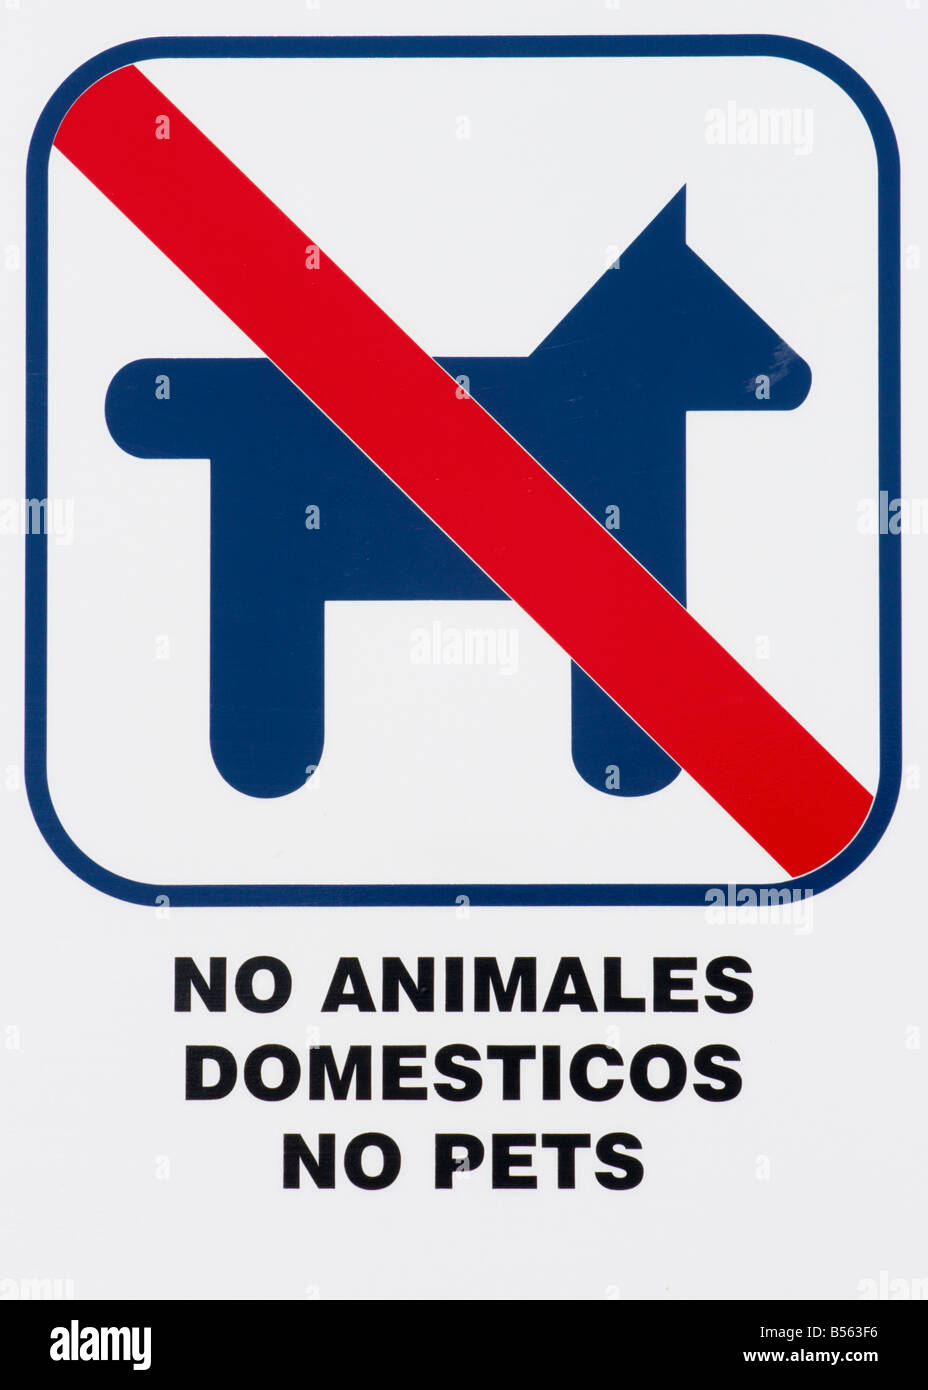 No pets sign in Spanish and English Stock Photo